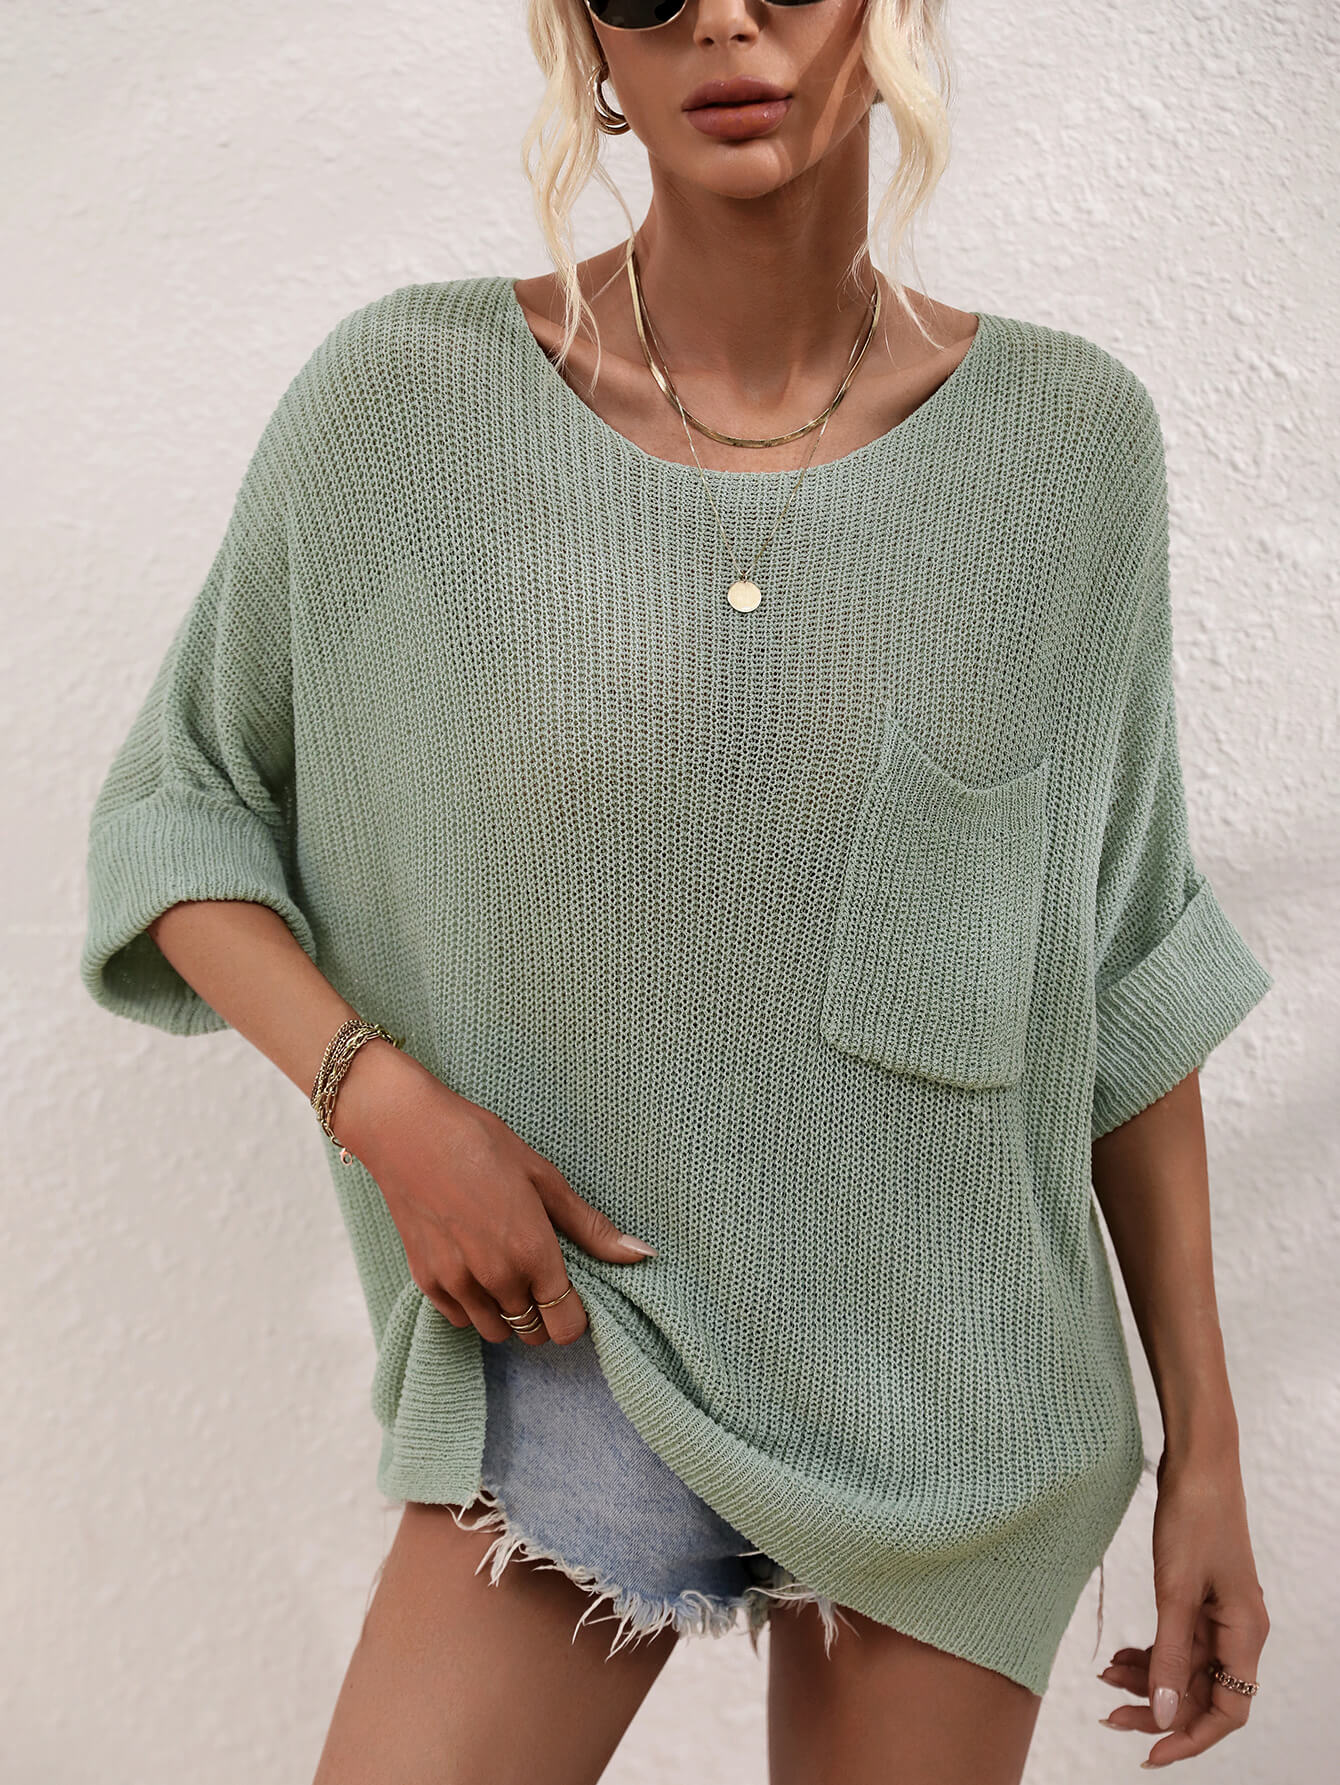 Knit Tunic Tops Tops for Women 